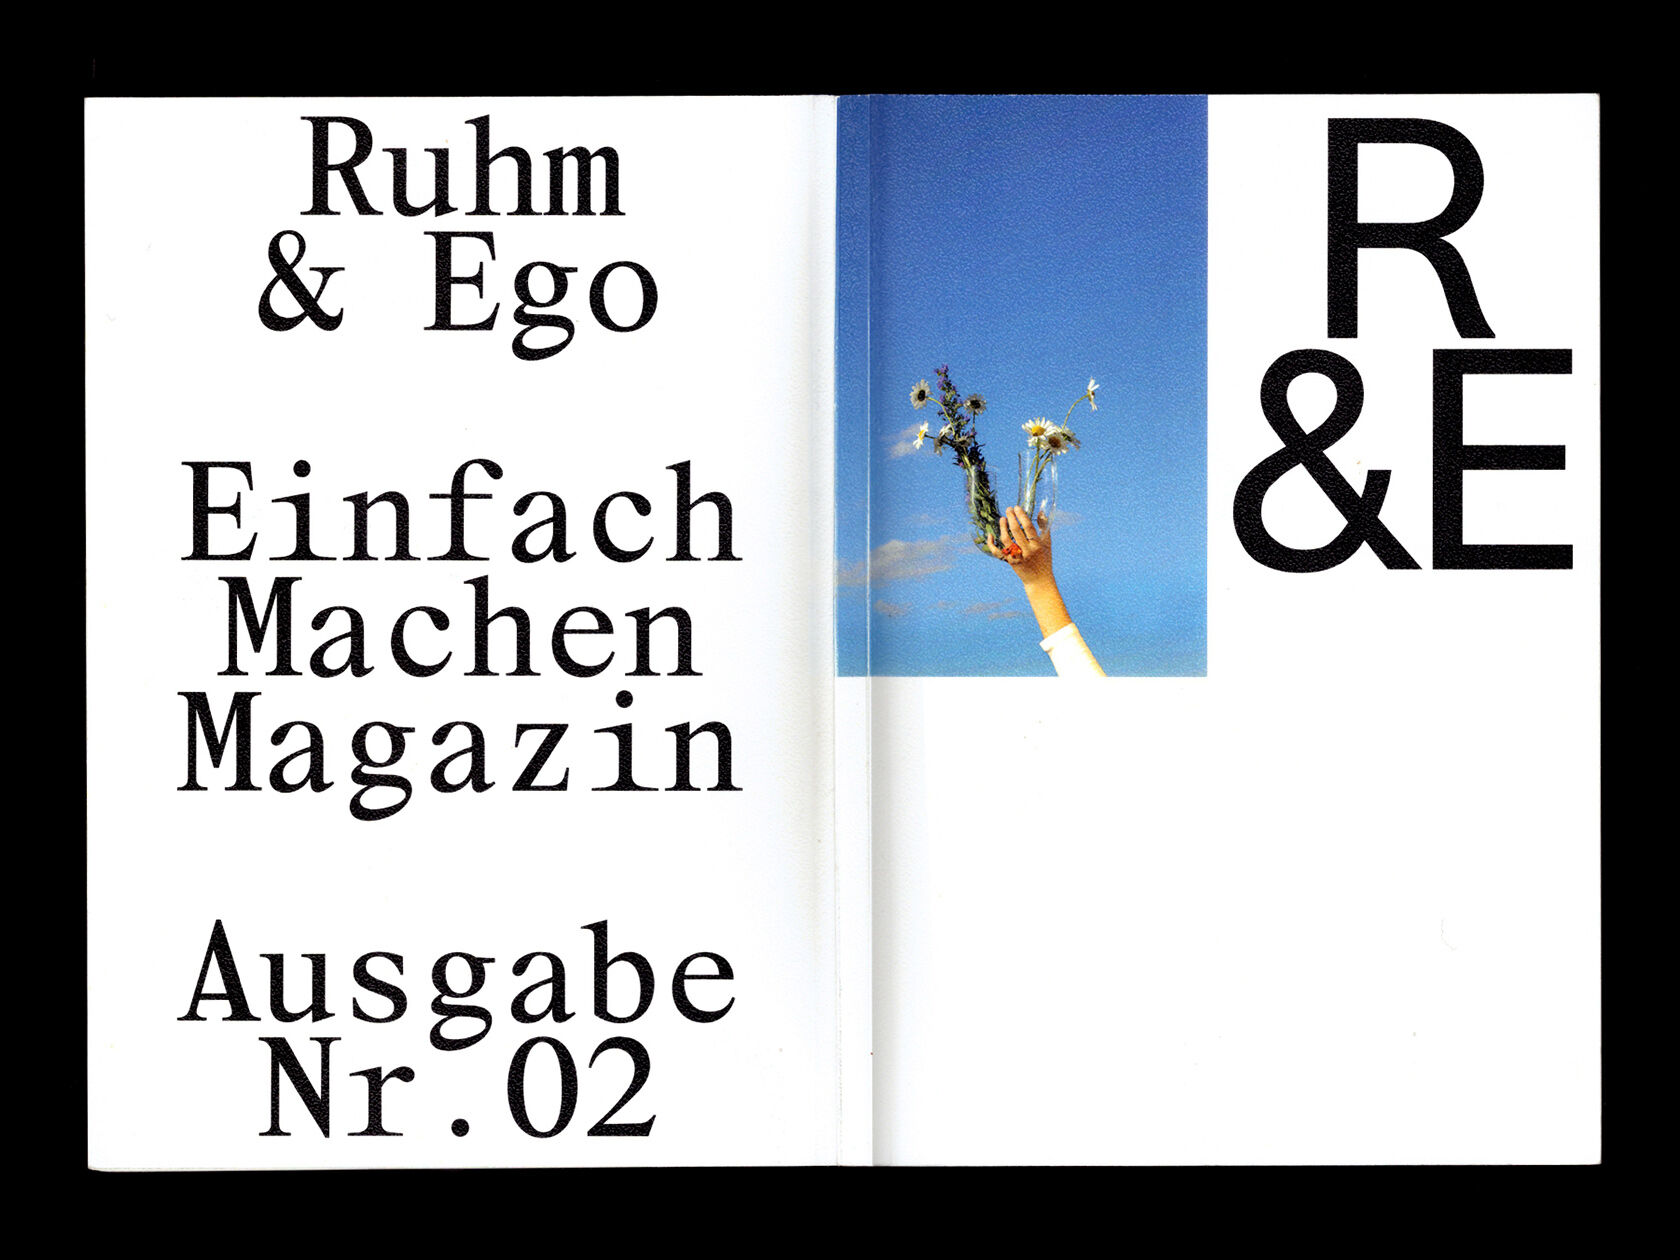 The magazine “Ruhm & Ego” by Sophia Weider and Lucas Hesse encourages you to get started on your next passion project